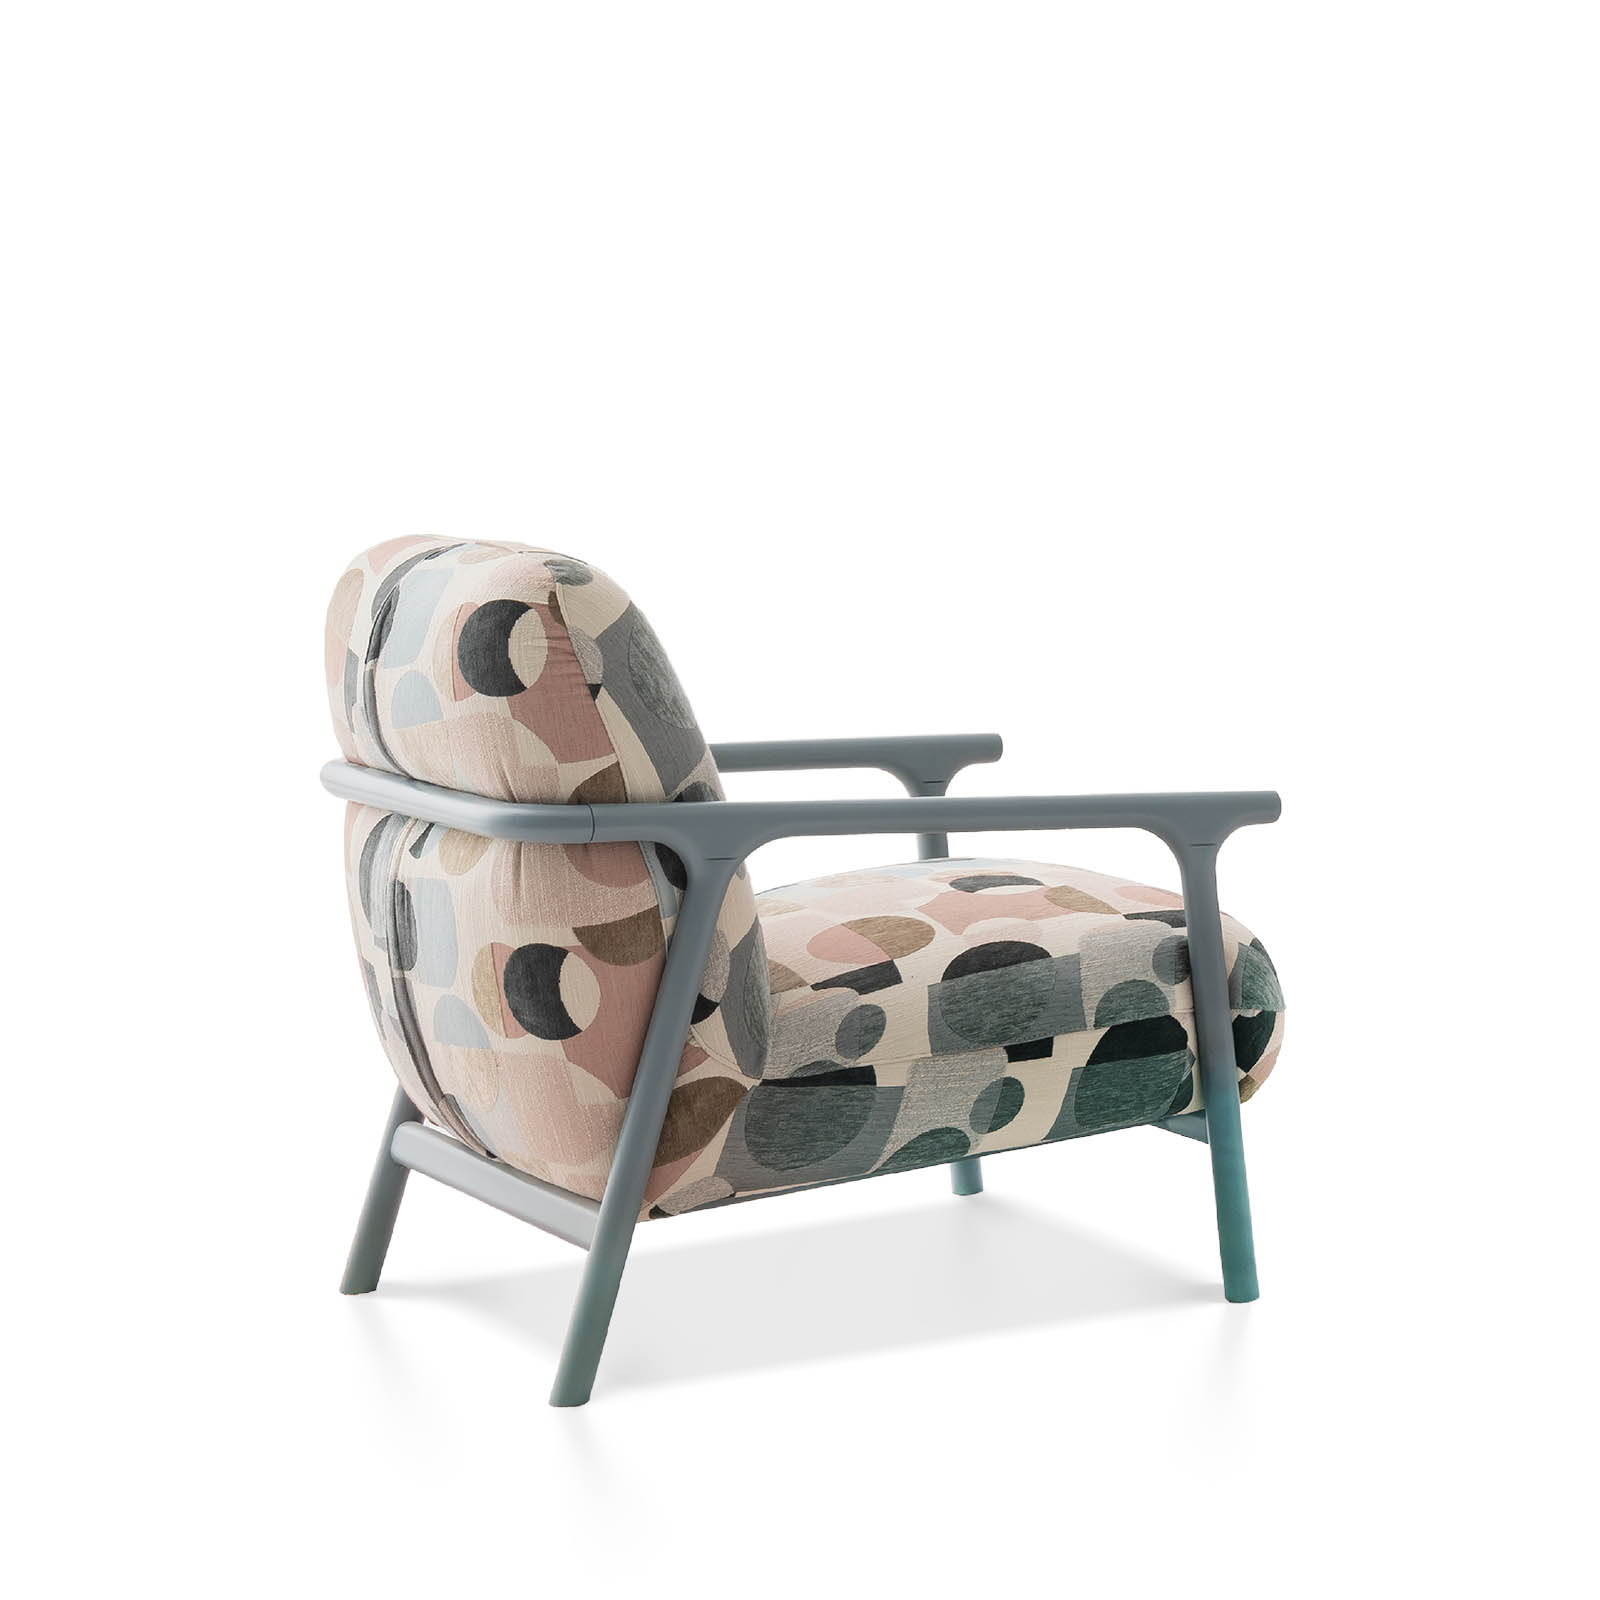 Sink into the plush cushions of the Boboli Marshmallow Armchair, featuring a unique and eye-catching fabric